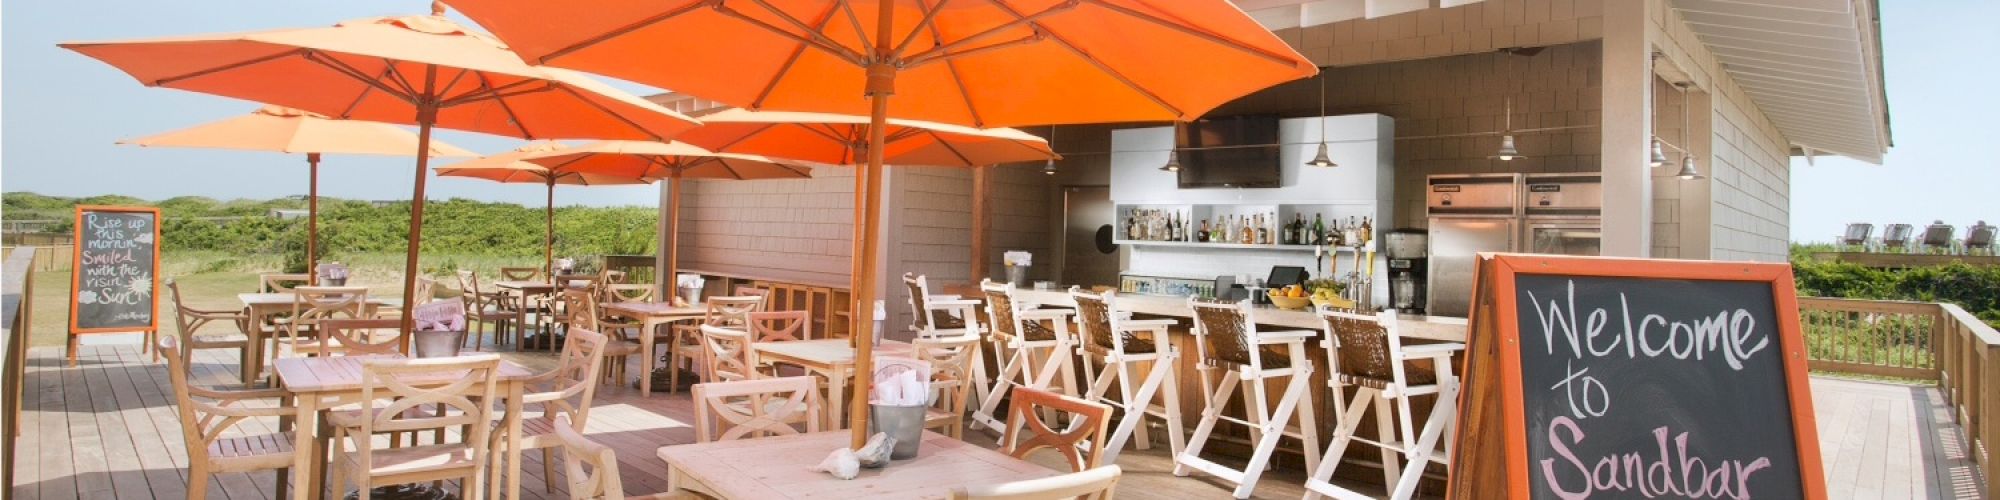 An outdoor café with orange umbrellas, wooden tables and chairs, and a chalkboard sign stating 